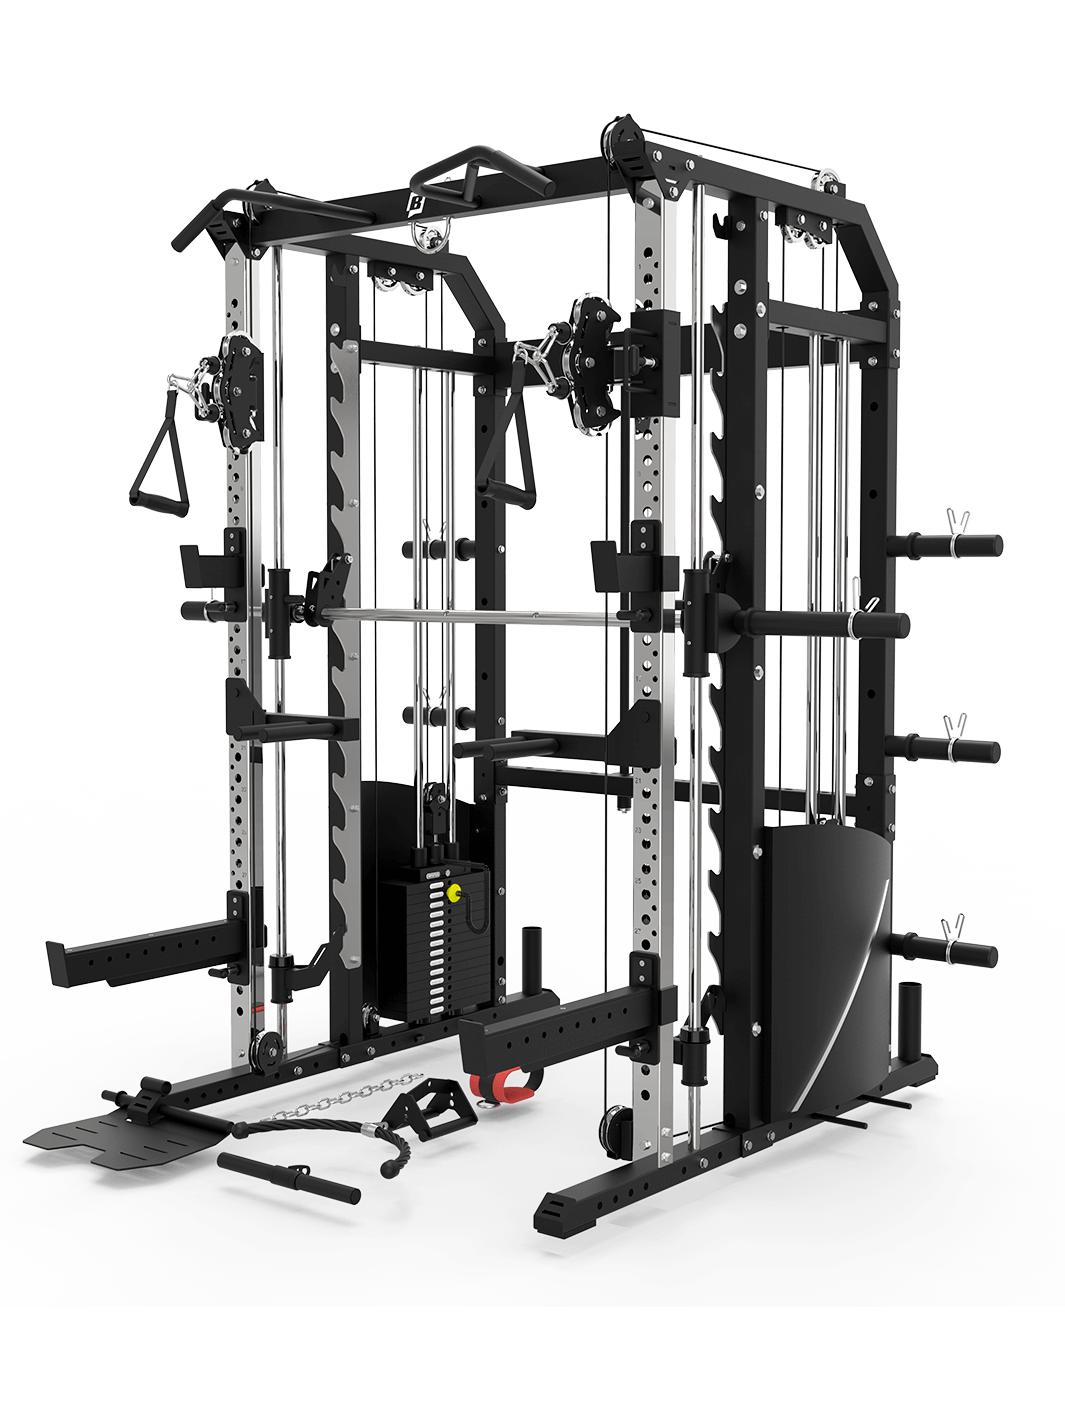 BLAZZED PLUS ALL-IN-ONE FUNCTIONAL TRAINER CABLE CROSSOVER CAGE HOME GYM W/ SMITH MACHINE